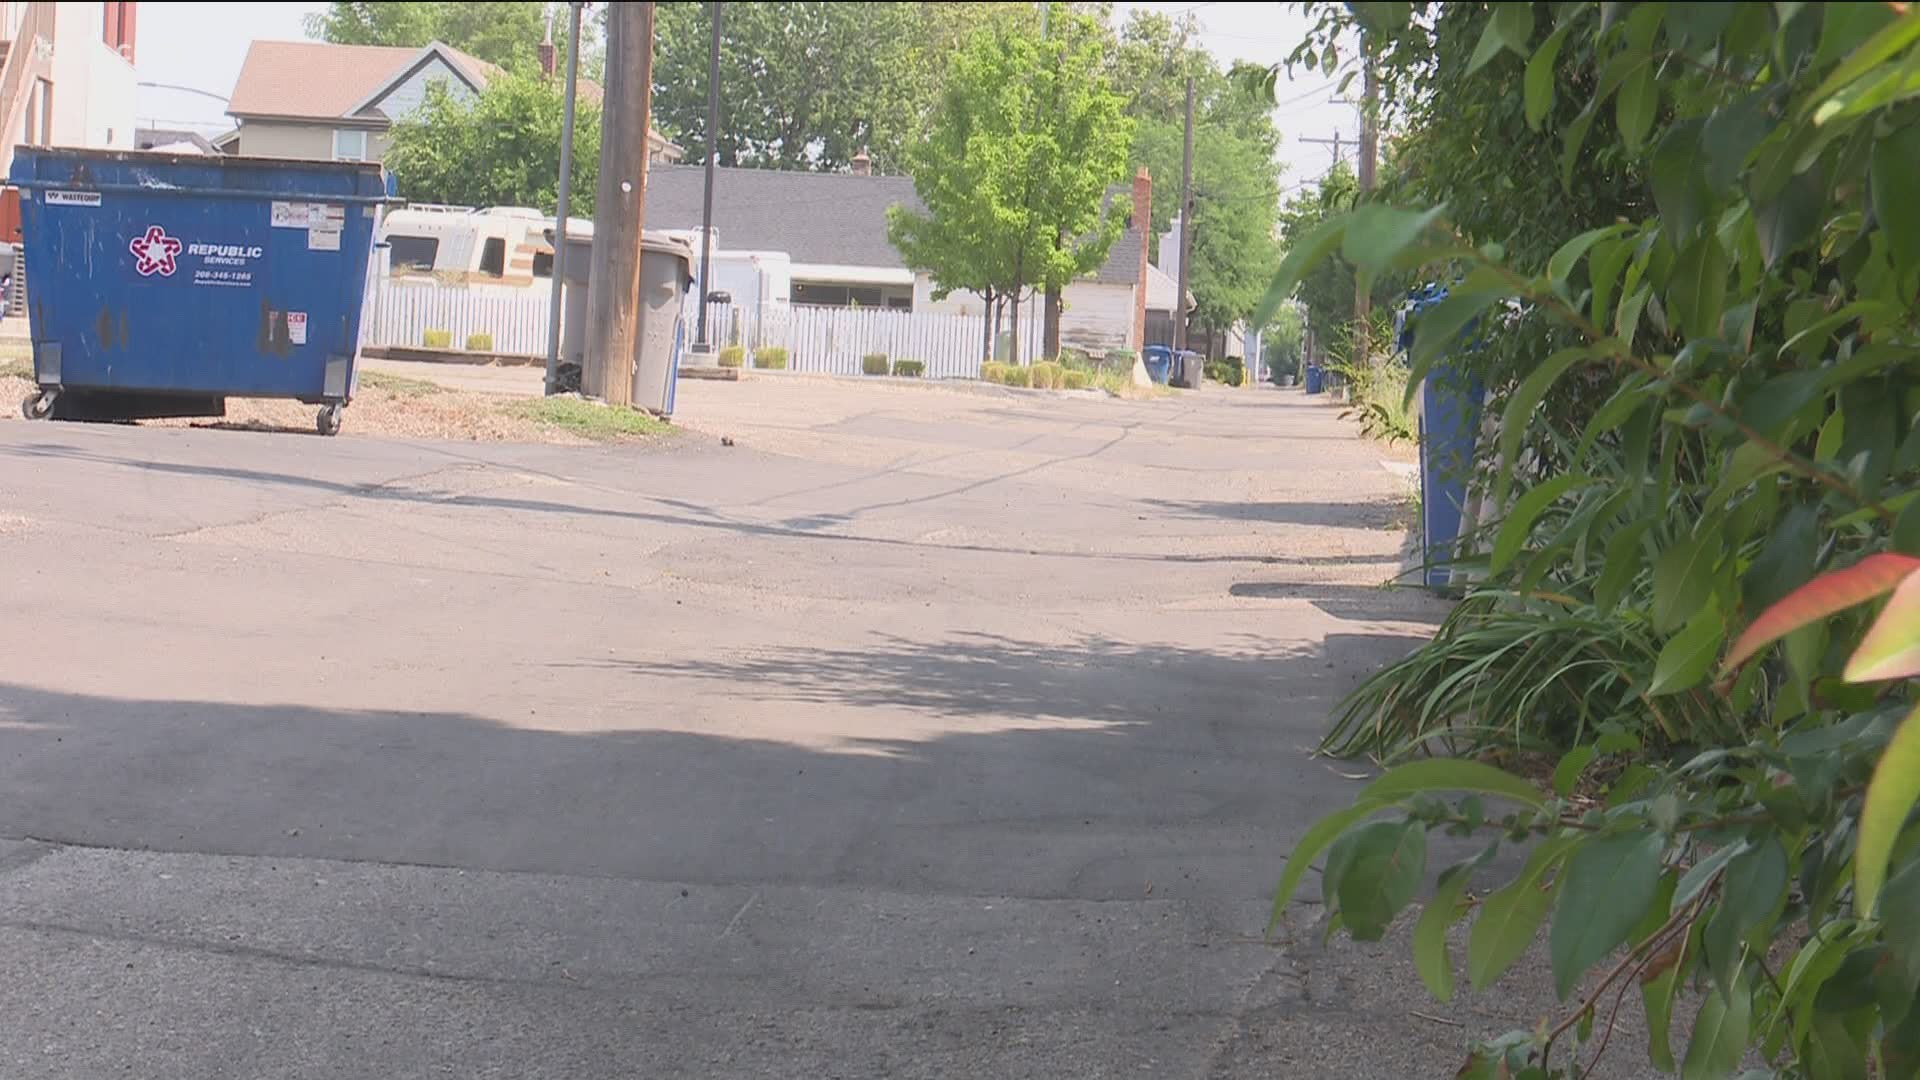 Boise Police officers were investigating a call about a man trespassing in a backyard along North 21st Street.